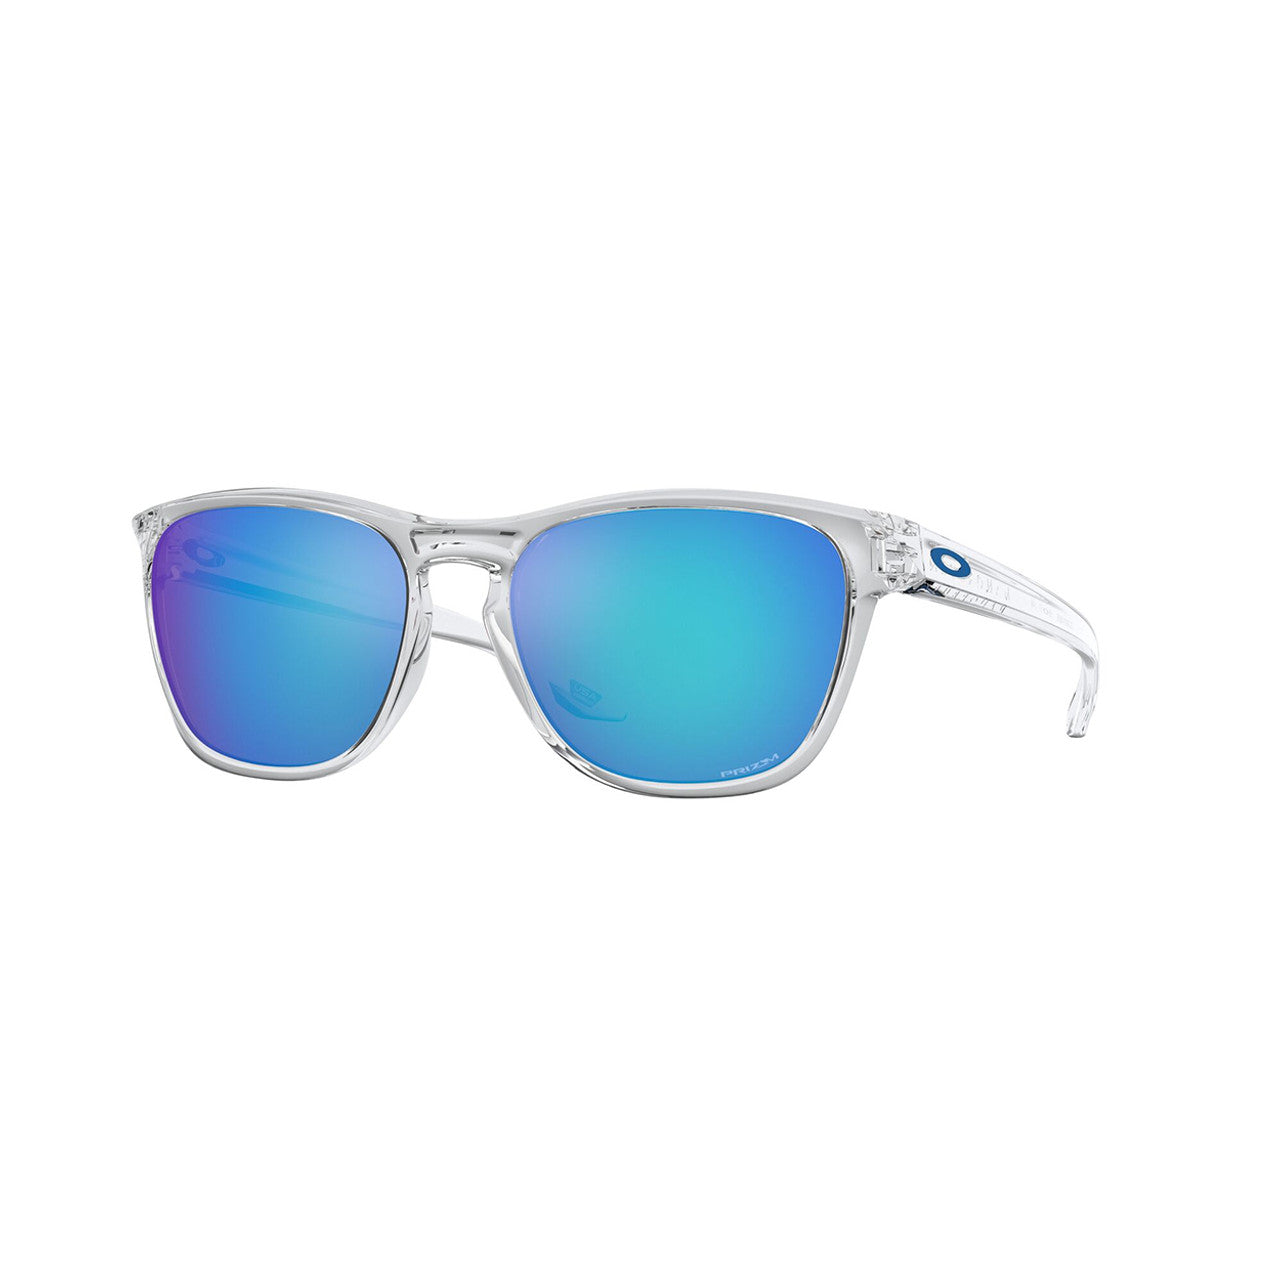 Oakley Manorburn Sunglasses Polished Clear Prizm Sapphire Lens